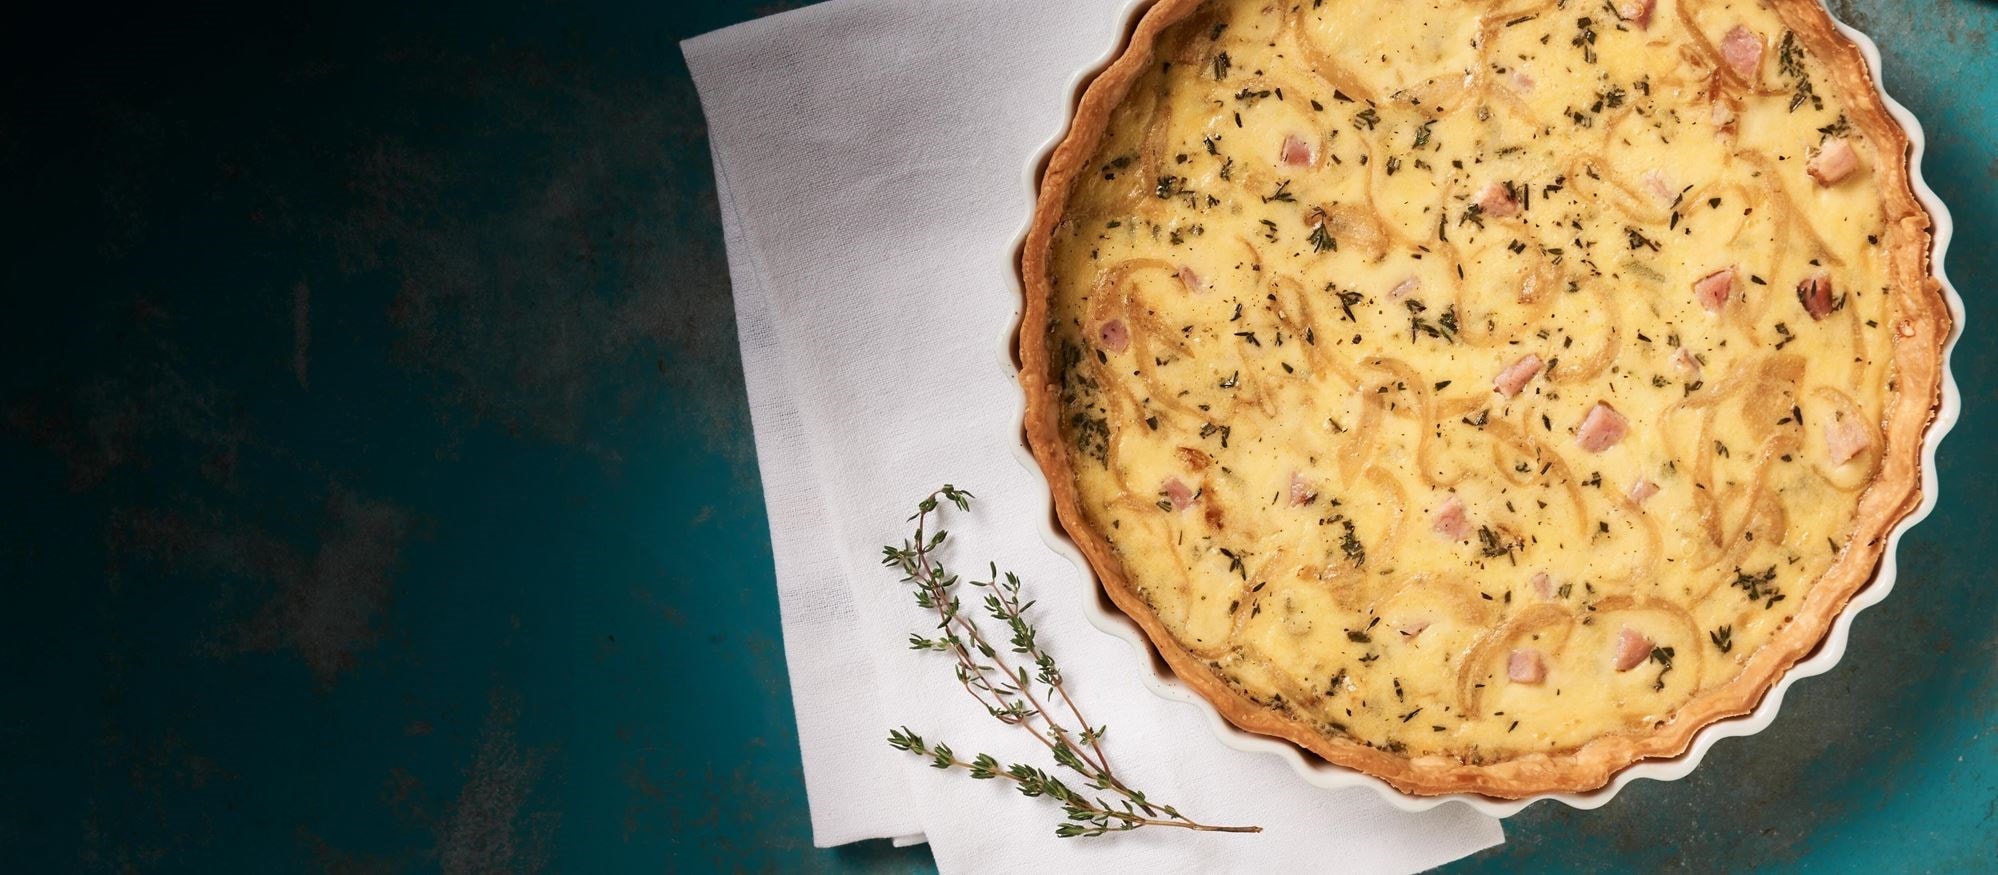 QuicheEasy and delicious Quiche Lorraine recipe using the Bake Mode setting of your Wolf Oven